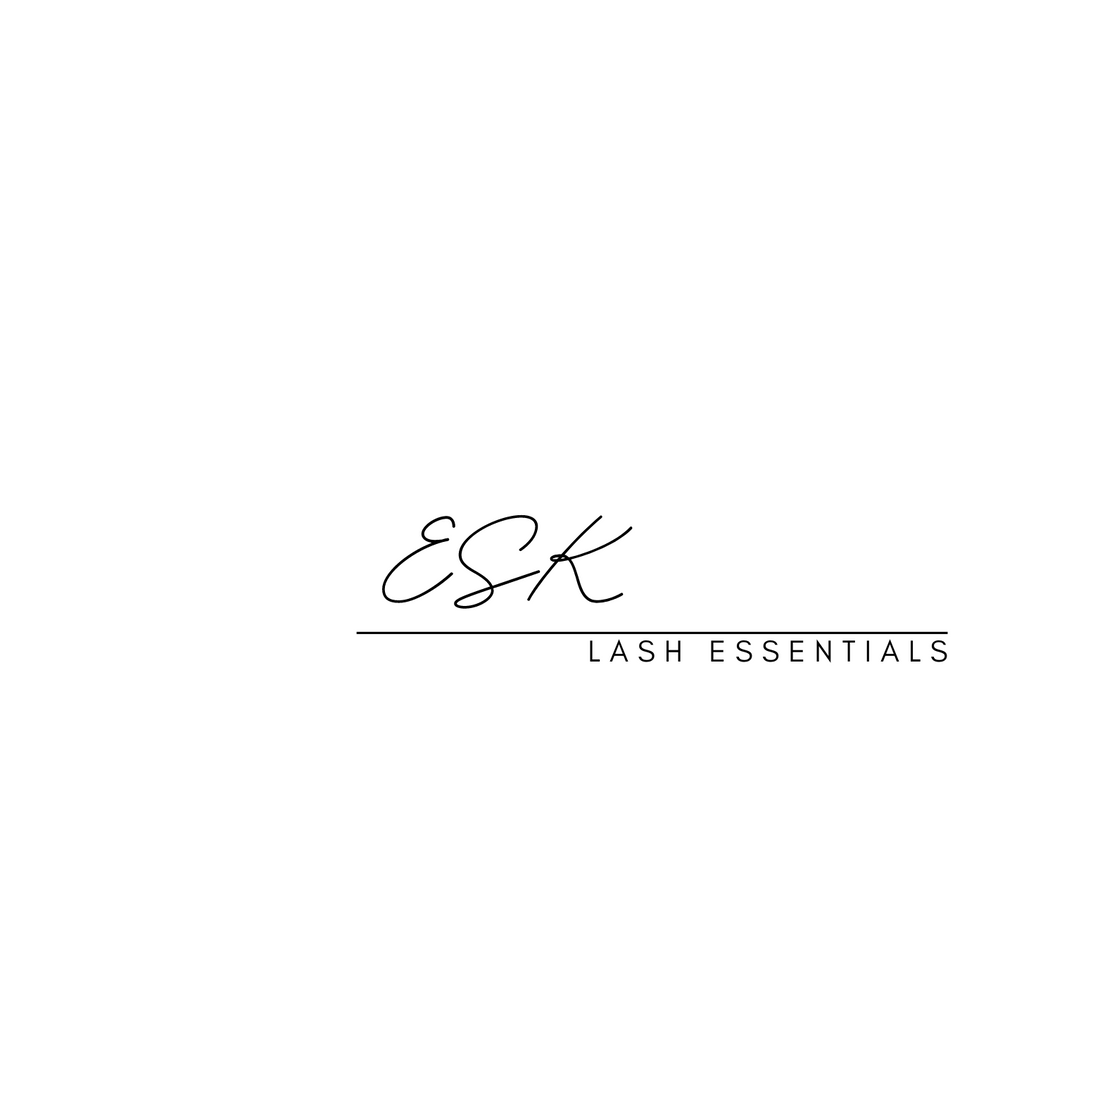 Mega Volume with ESK! ESK eyelash extension products and supplies 8/13/23 4:58pm